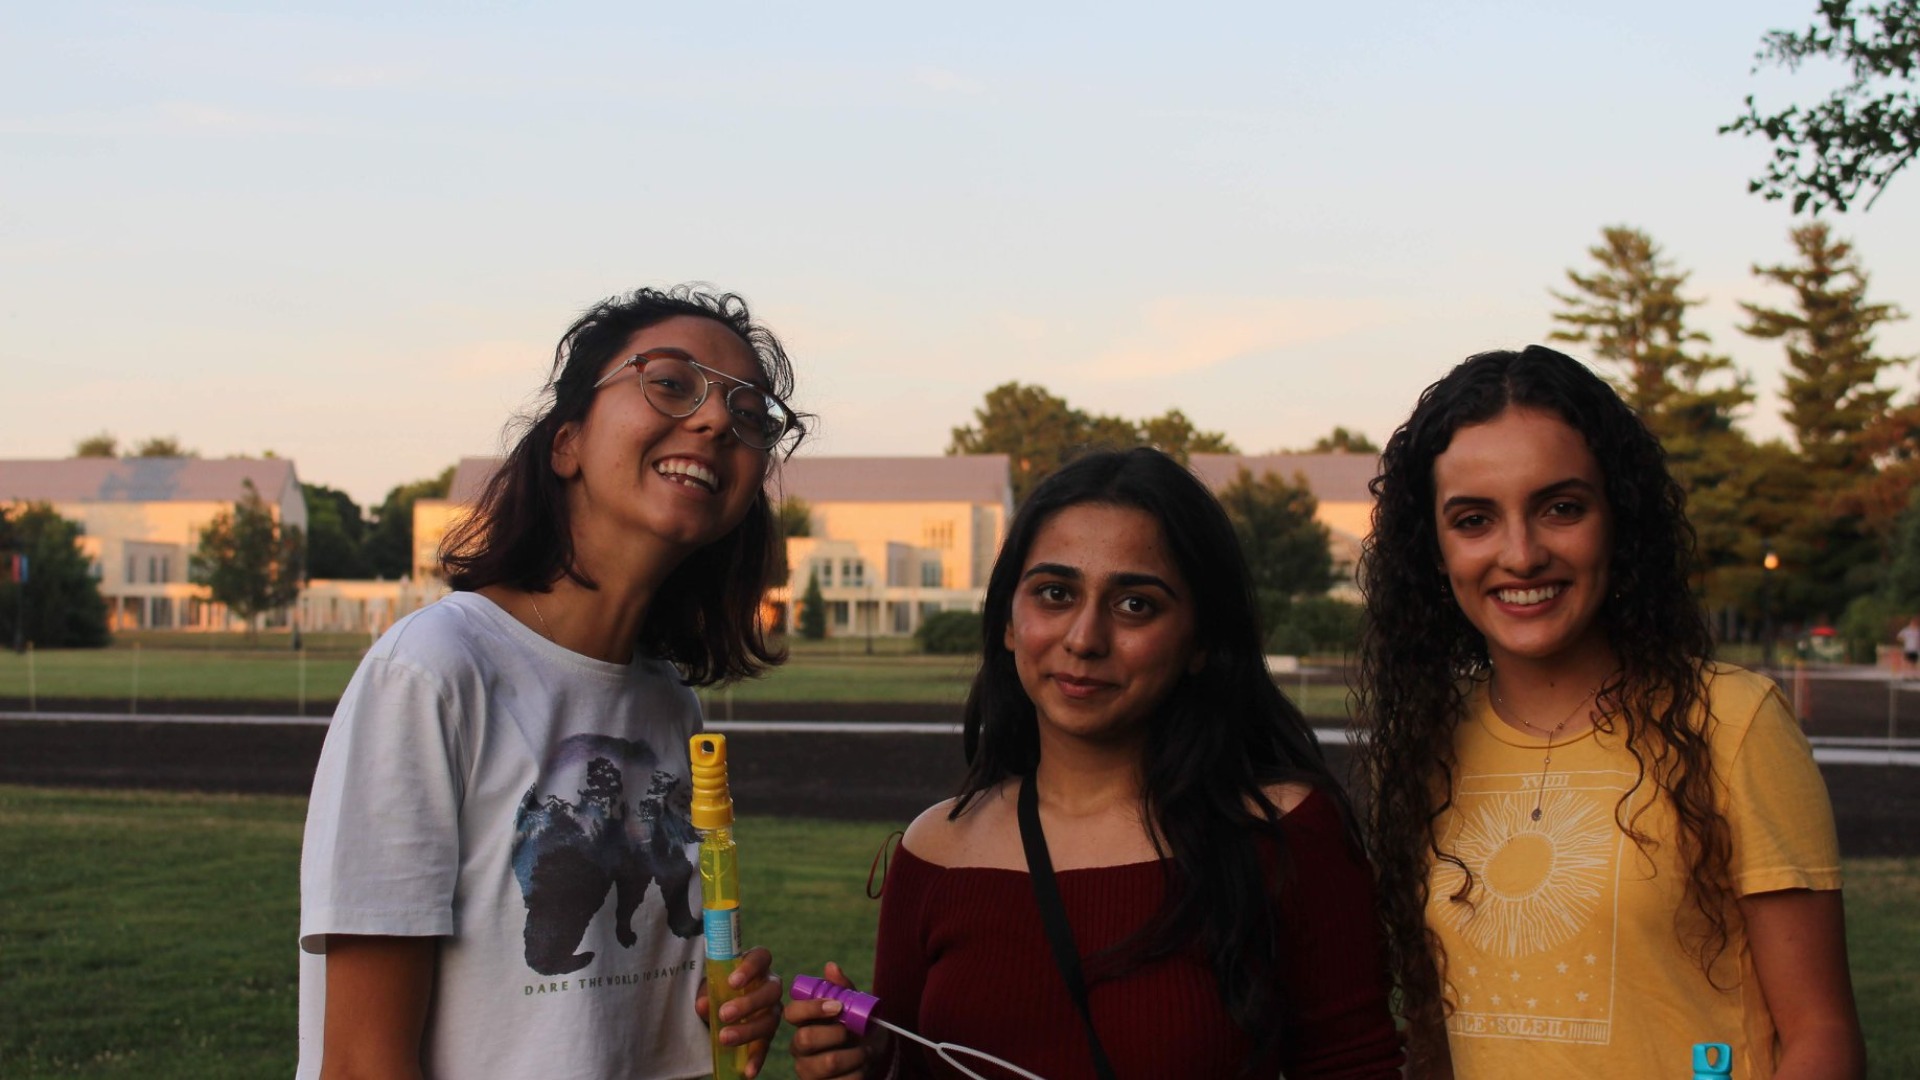 Me and my new IPOP friends smile at the camera and looking at the beautiful sunset. To our backs is East Campus.